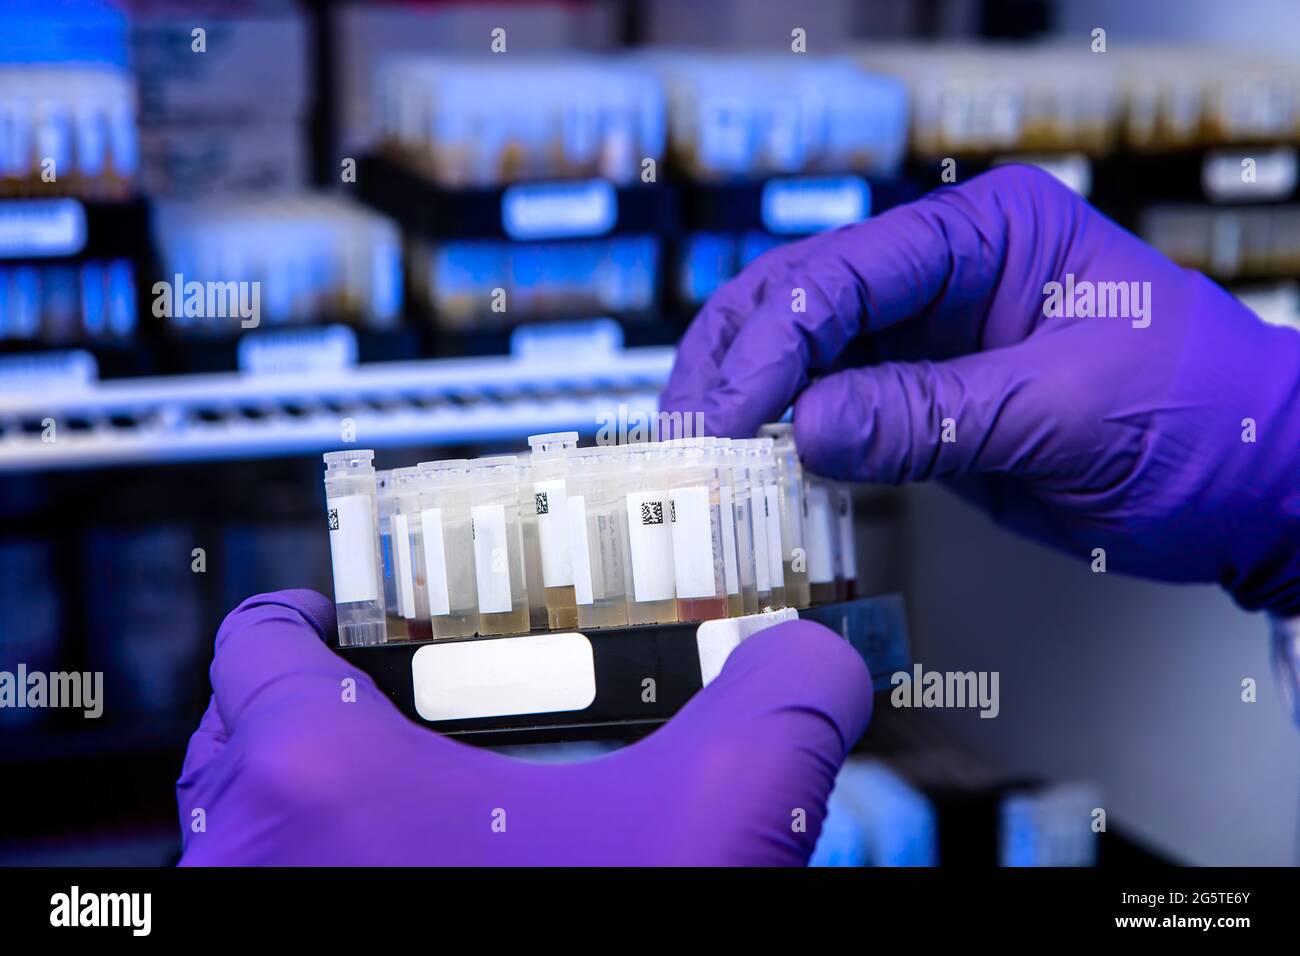 Centers for Disease Control and Prevention (CDC) scientists tested serological specimens for antibody,2 antibodies, using automated instrumentation. Serological testing is used to detect antibodies, which indicate past viral infection, and is important to the understand of disease prevalence within a population. Stock Photo